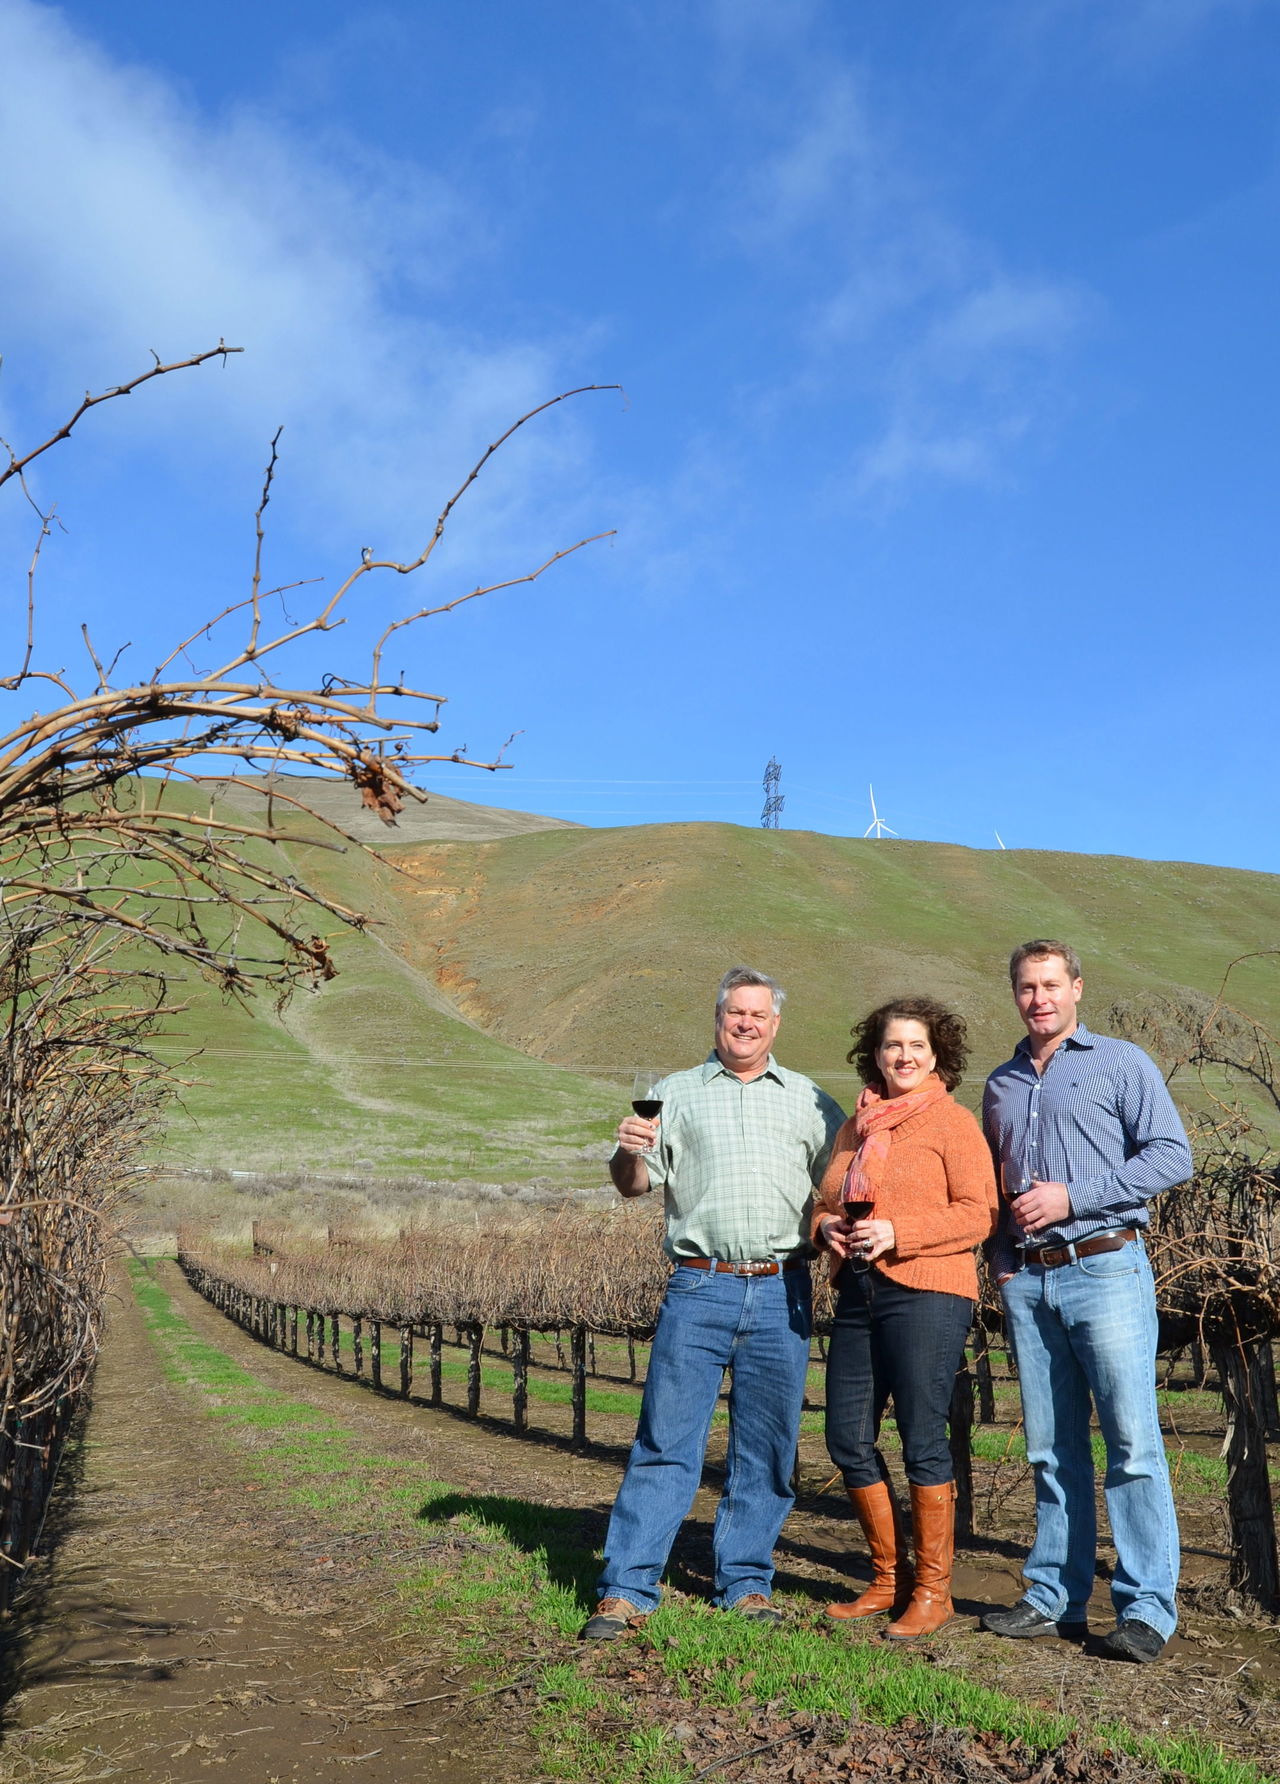 Owners Craig and Vicki Leuthold and winemaker Richard Batchelor lead Maryhill Winery in Goldendale. Maryhill has become one of Washington’s top producers in the past few years.